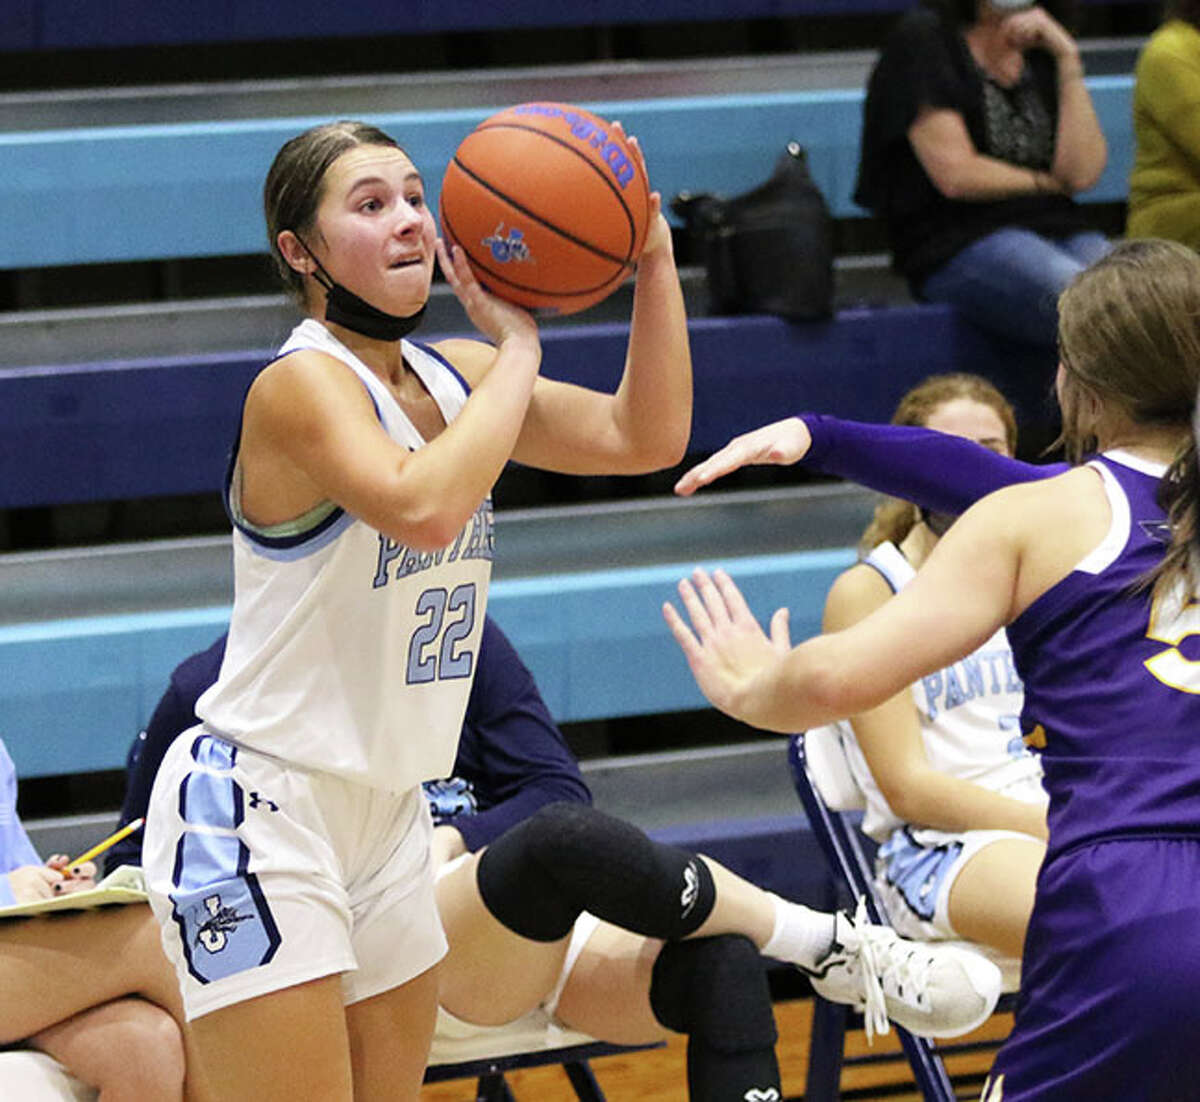 Jersey's Tessa Crawford scored 10 points in Wednesday's MVC loss to Triad in Troy.